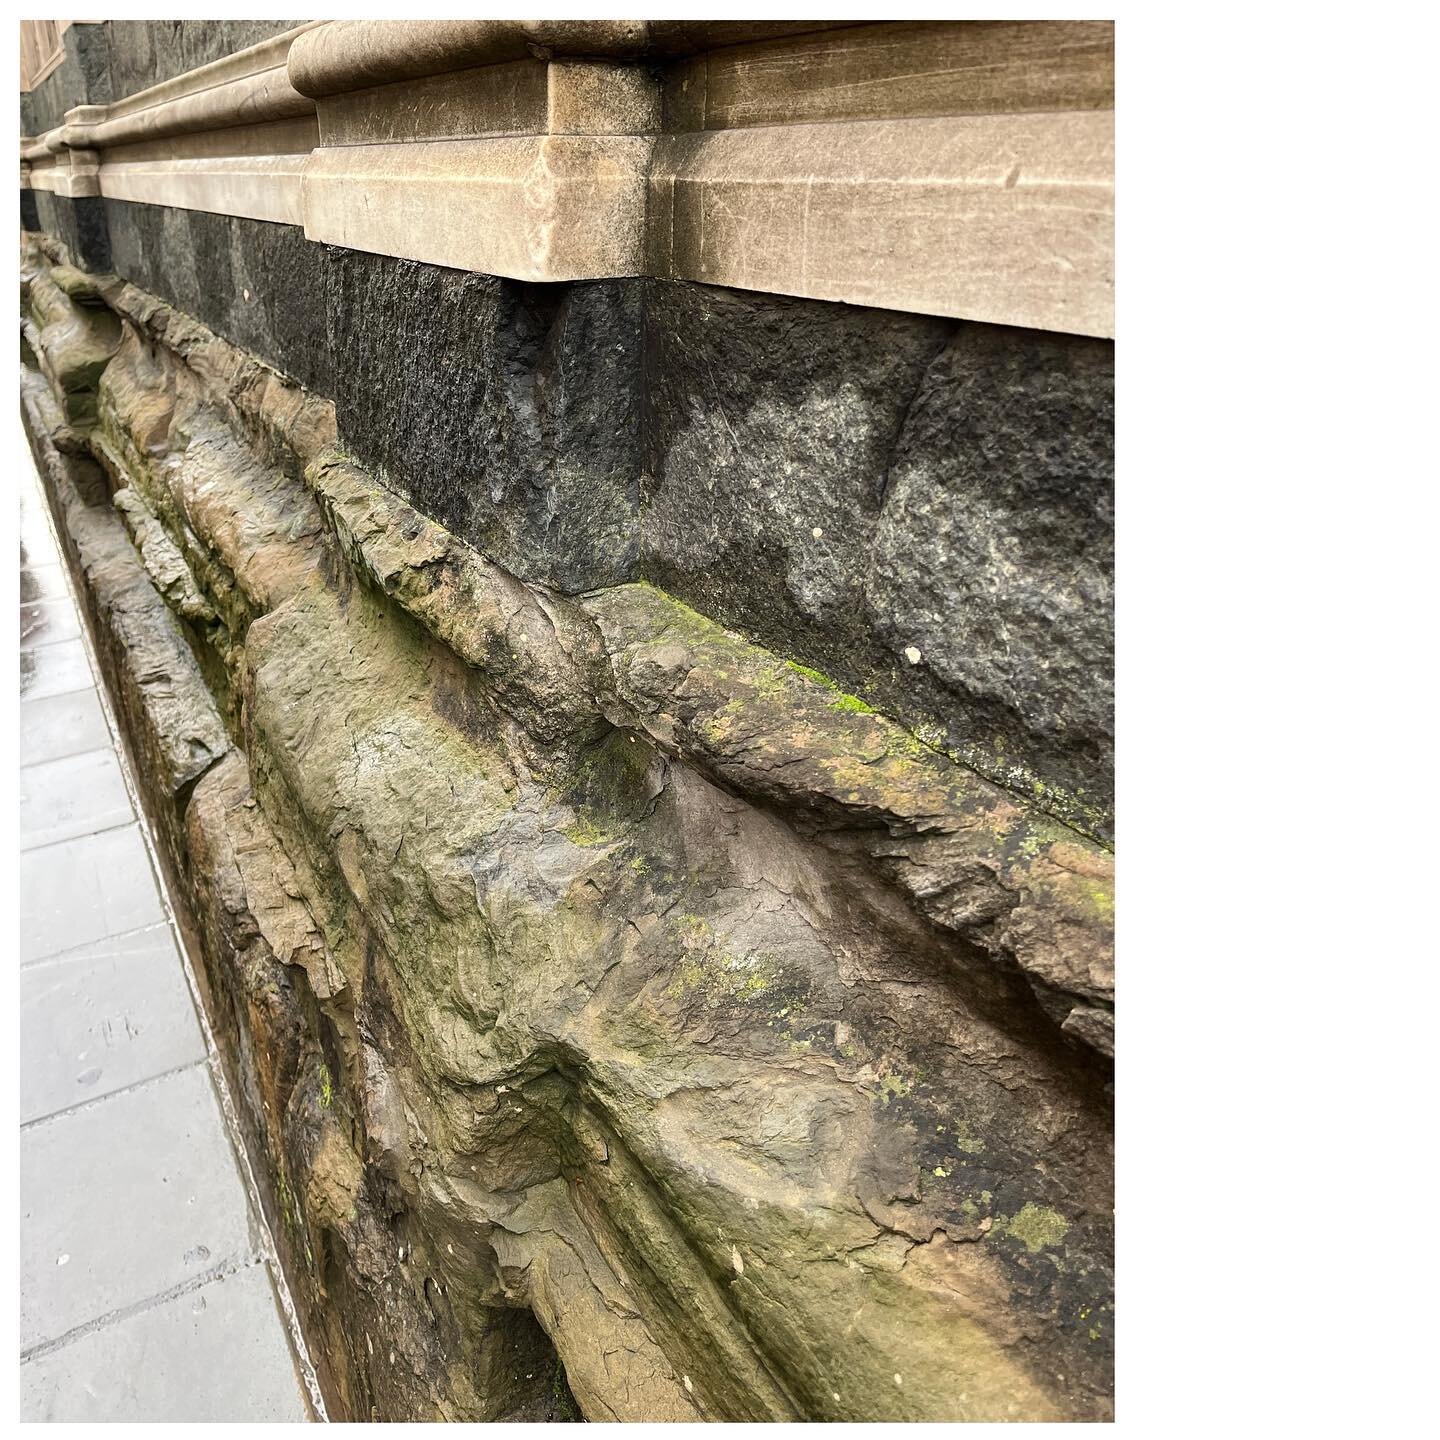 Things get messy close to the ground. A weathered base. Discoloured stone. Architectural strata beyond Alberti&rsquo;s facade.

This photo of the adjacent wall to Alberti&rsquo;s Renaissance facade of the church of Santa Maria Novella in Florence was